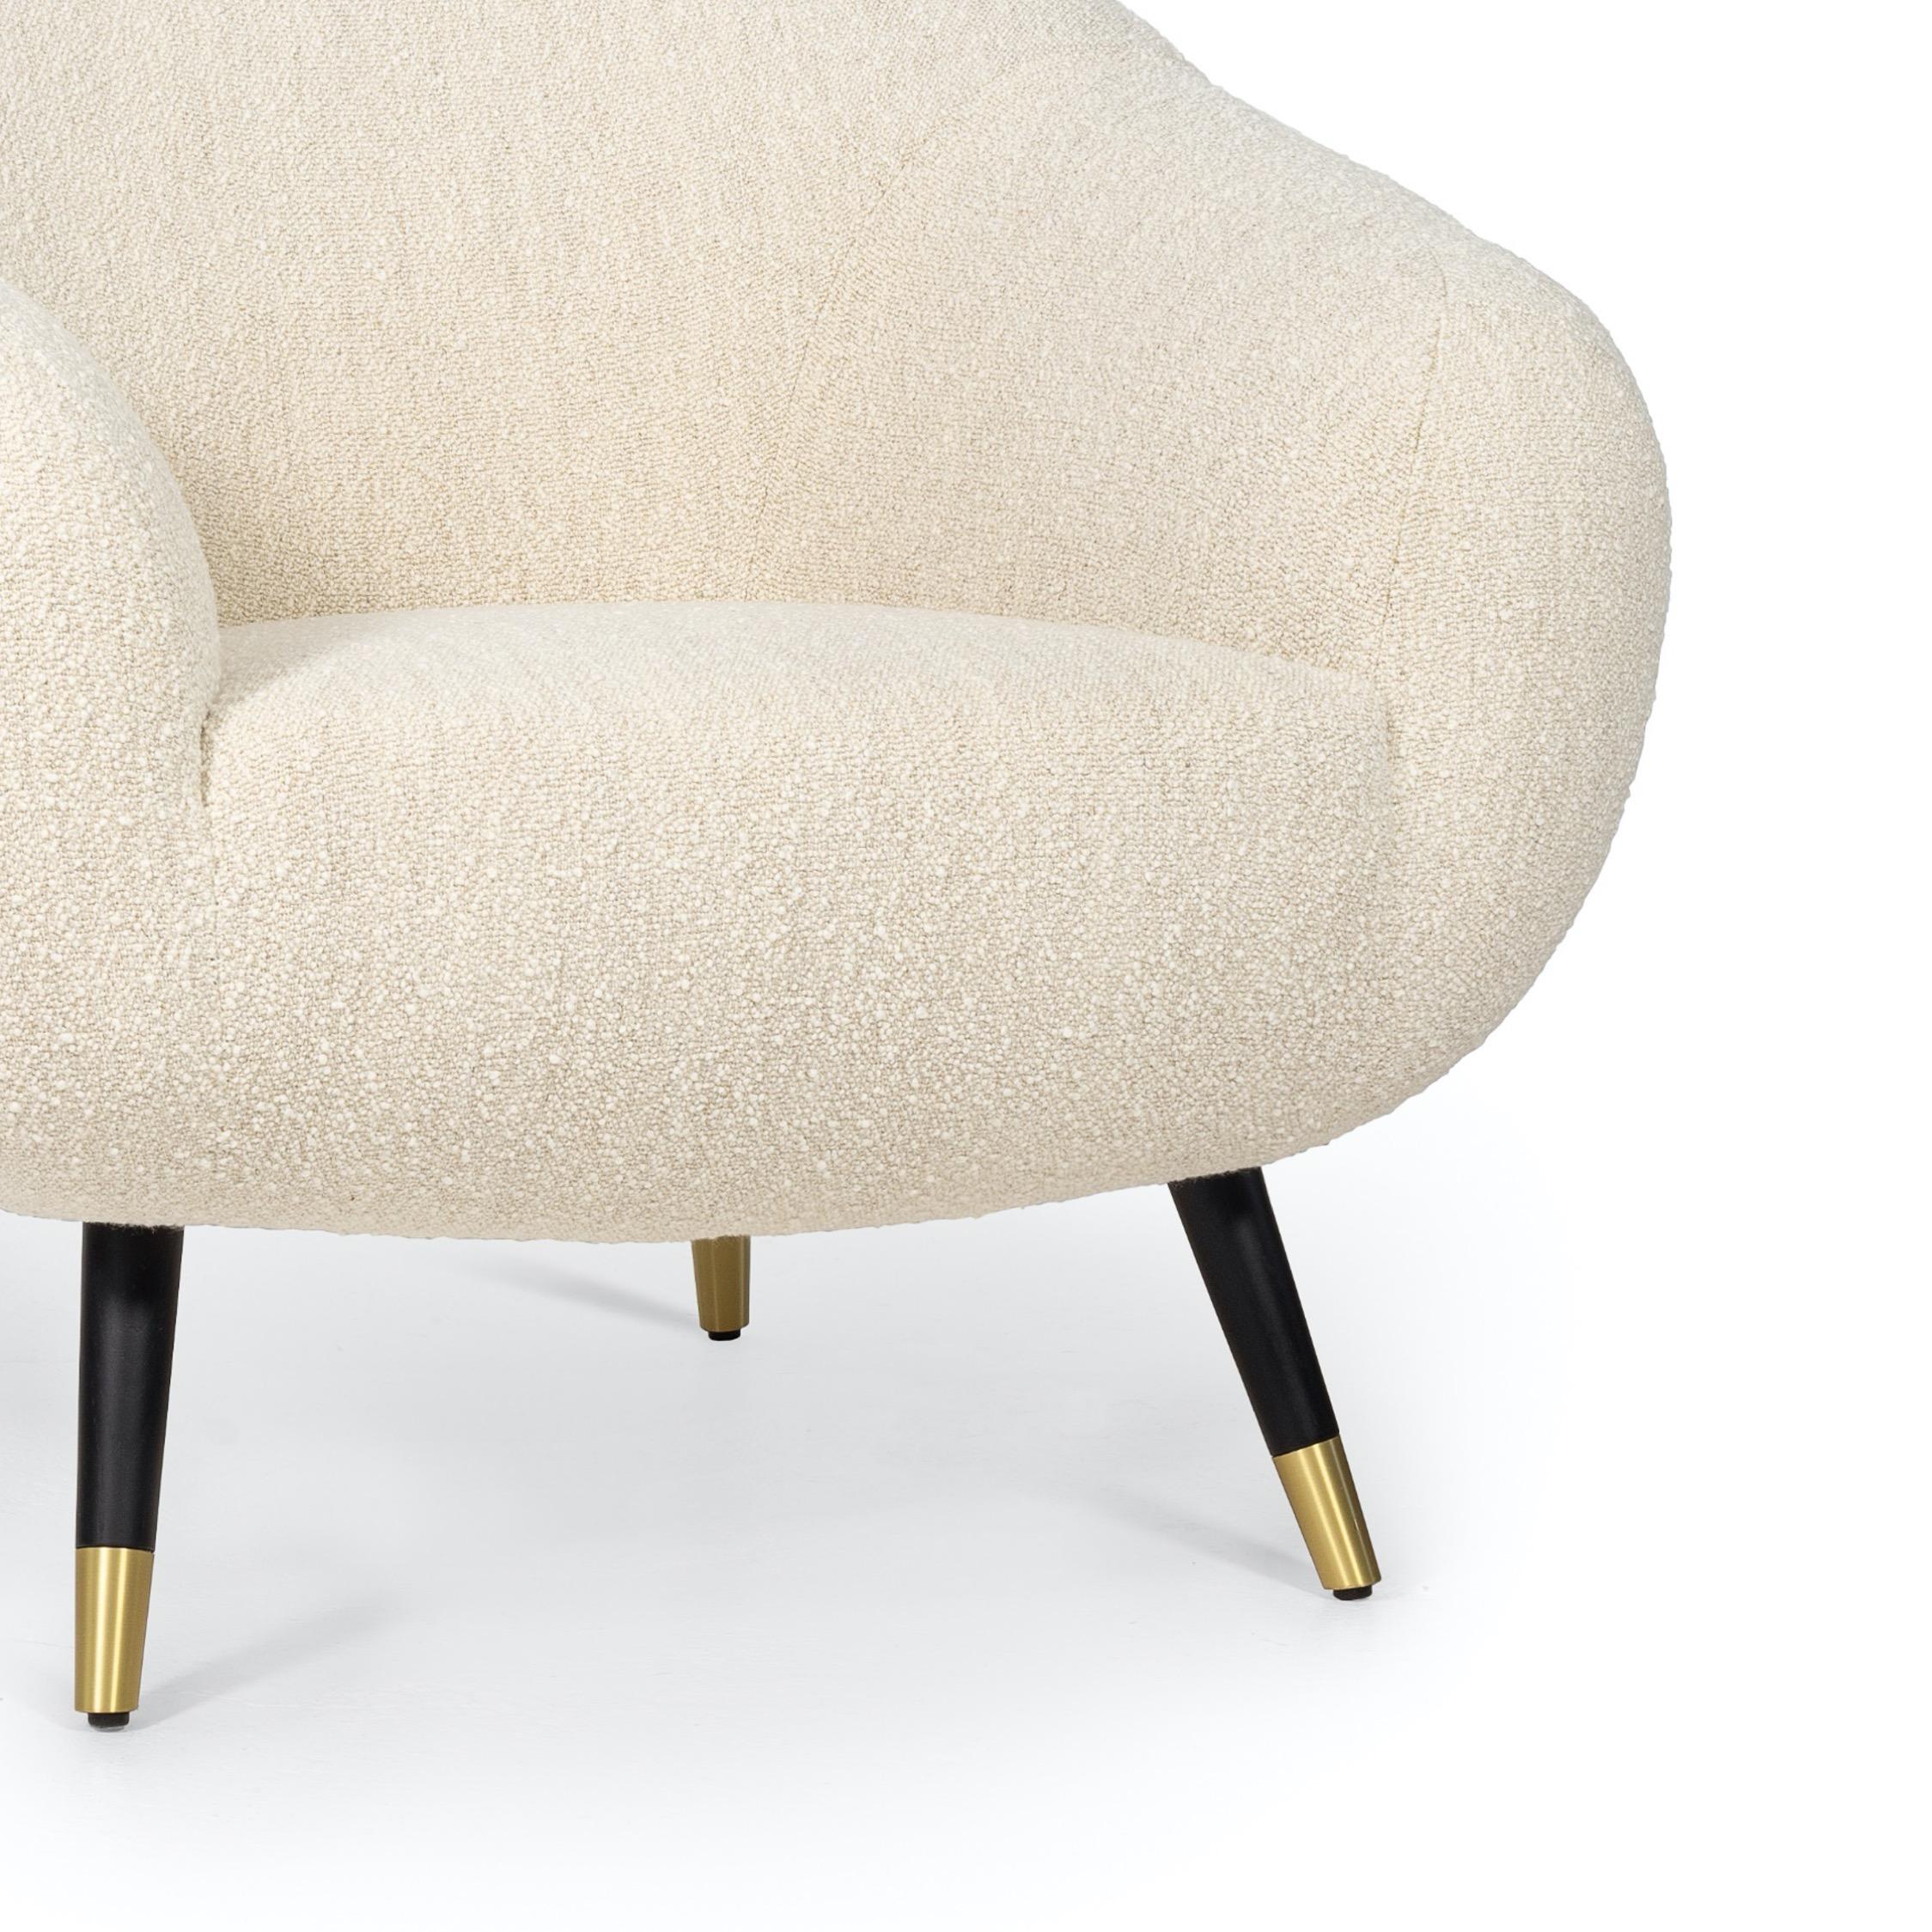 Brushed Niemeyer Armchair, Bouclé and Brass, Insidherland by Joana Santos Barbosa For Sale